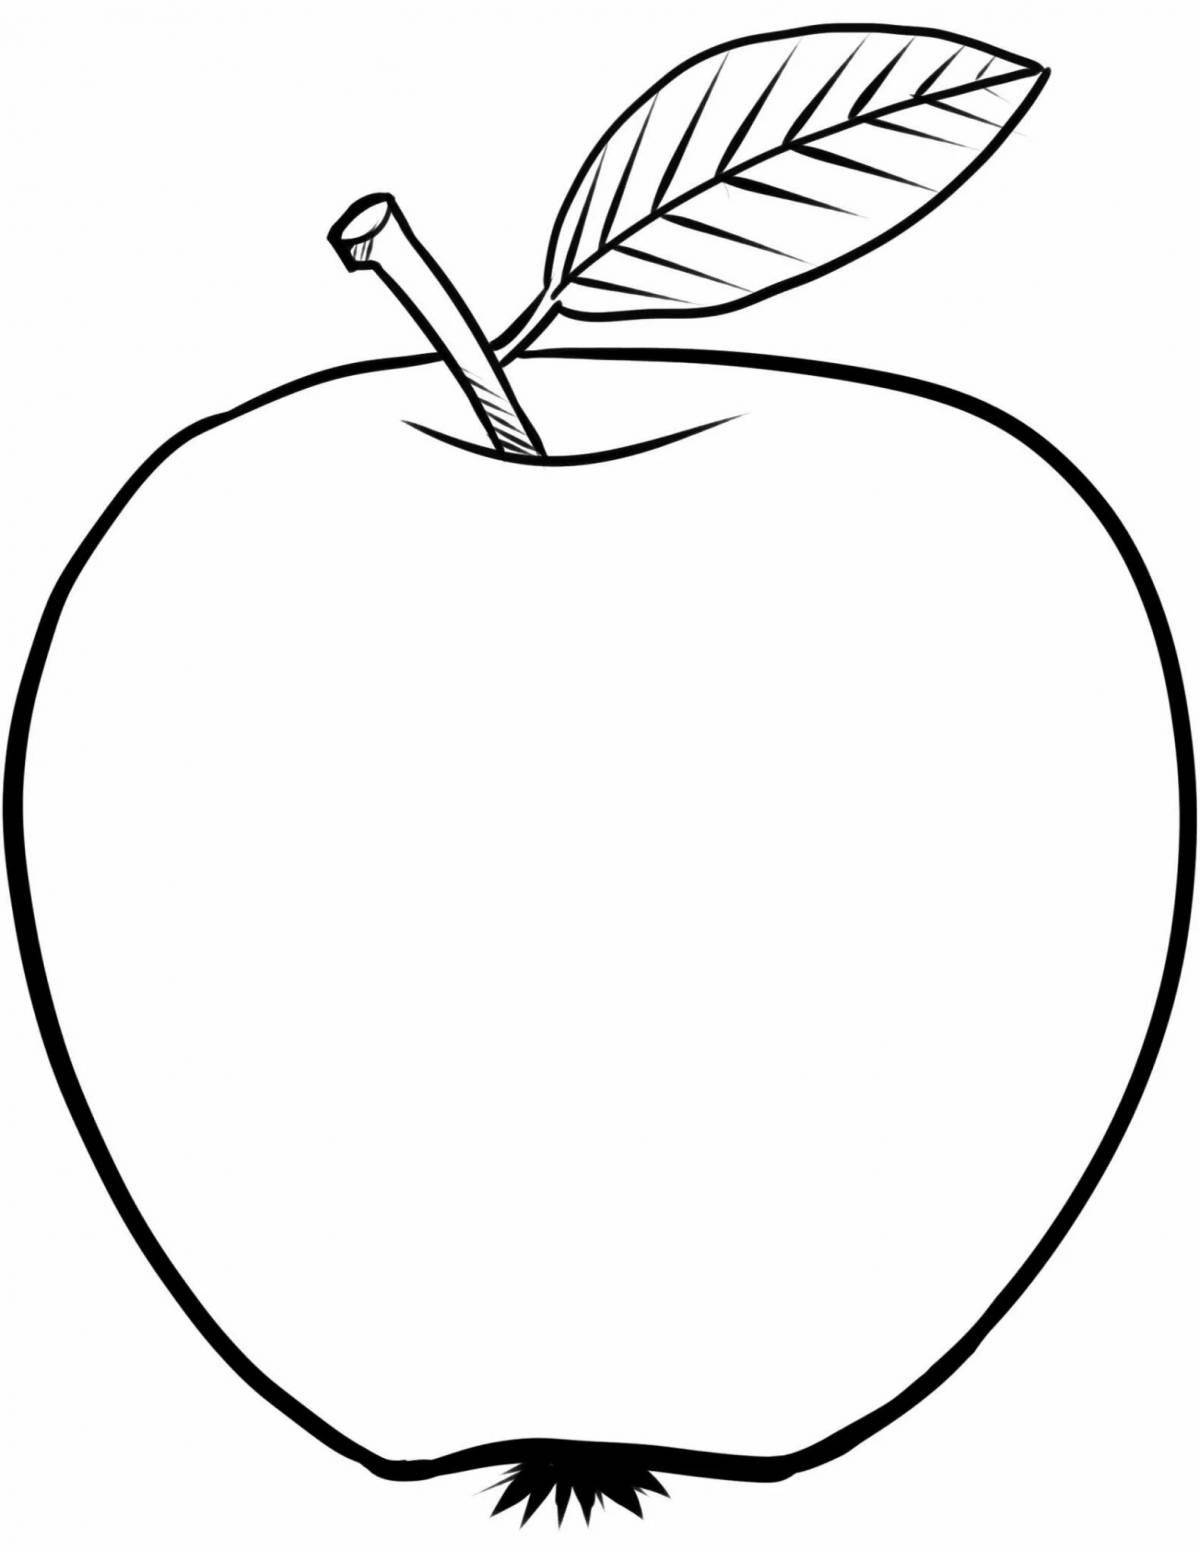 Delightful drawing of an apple for kids